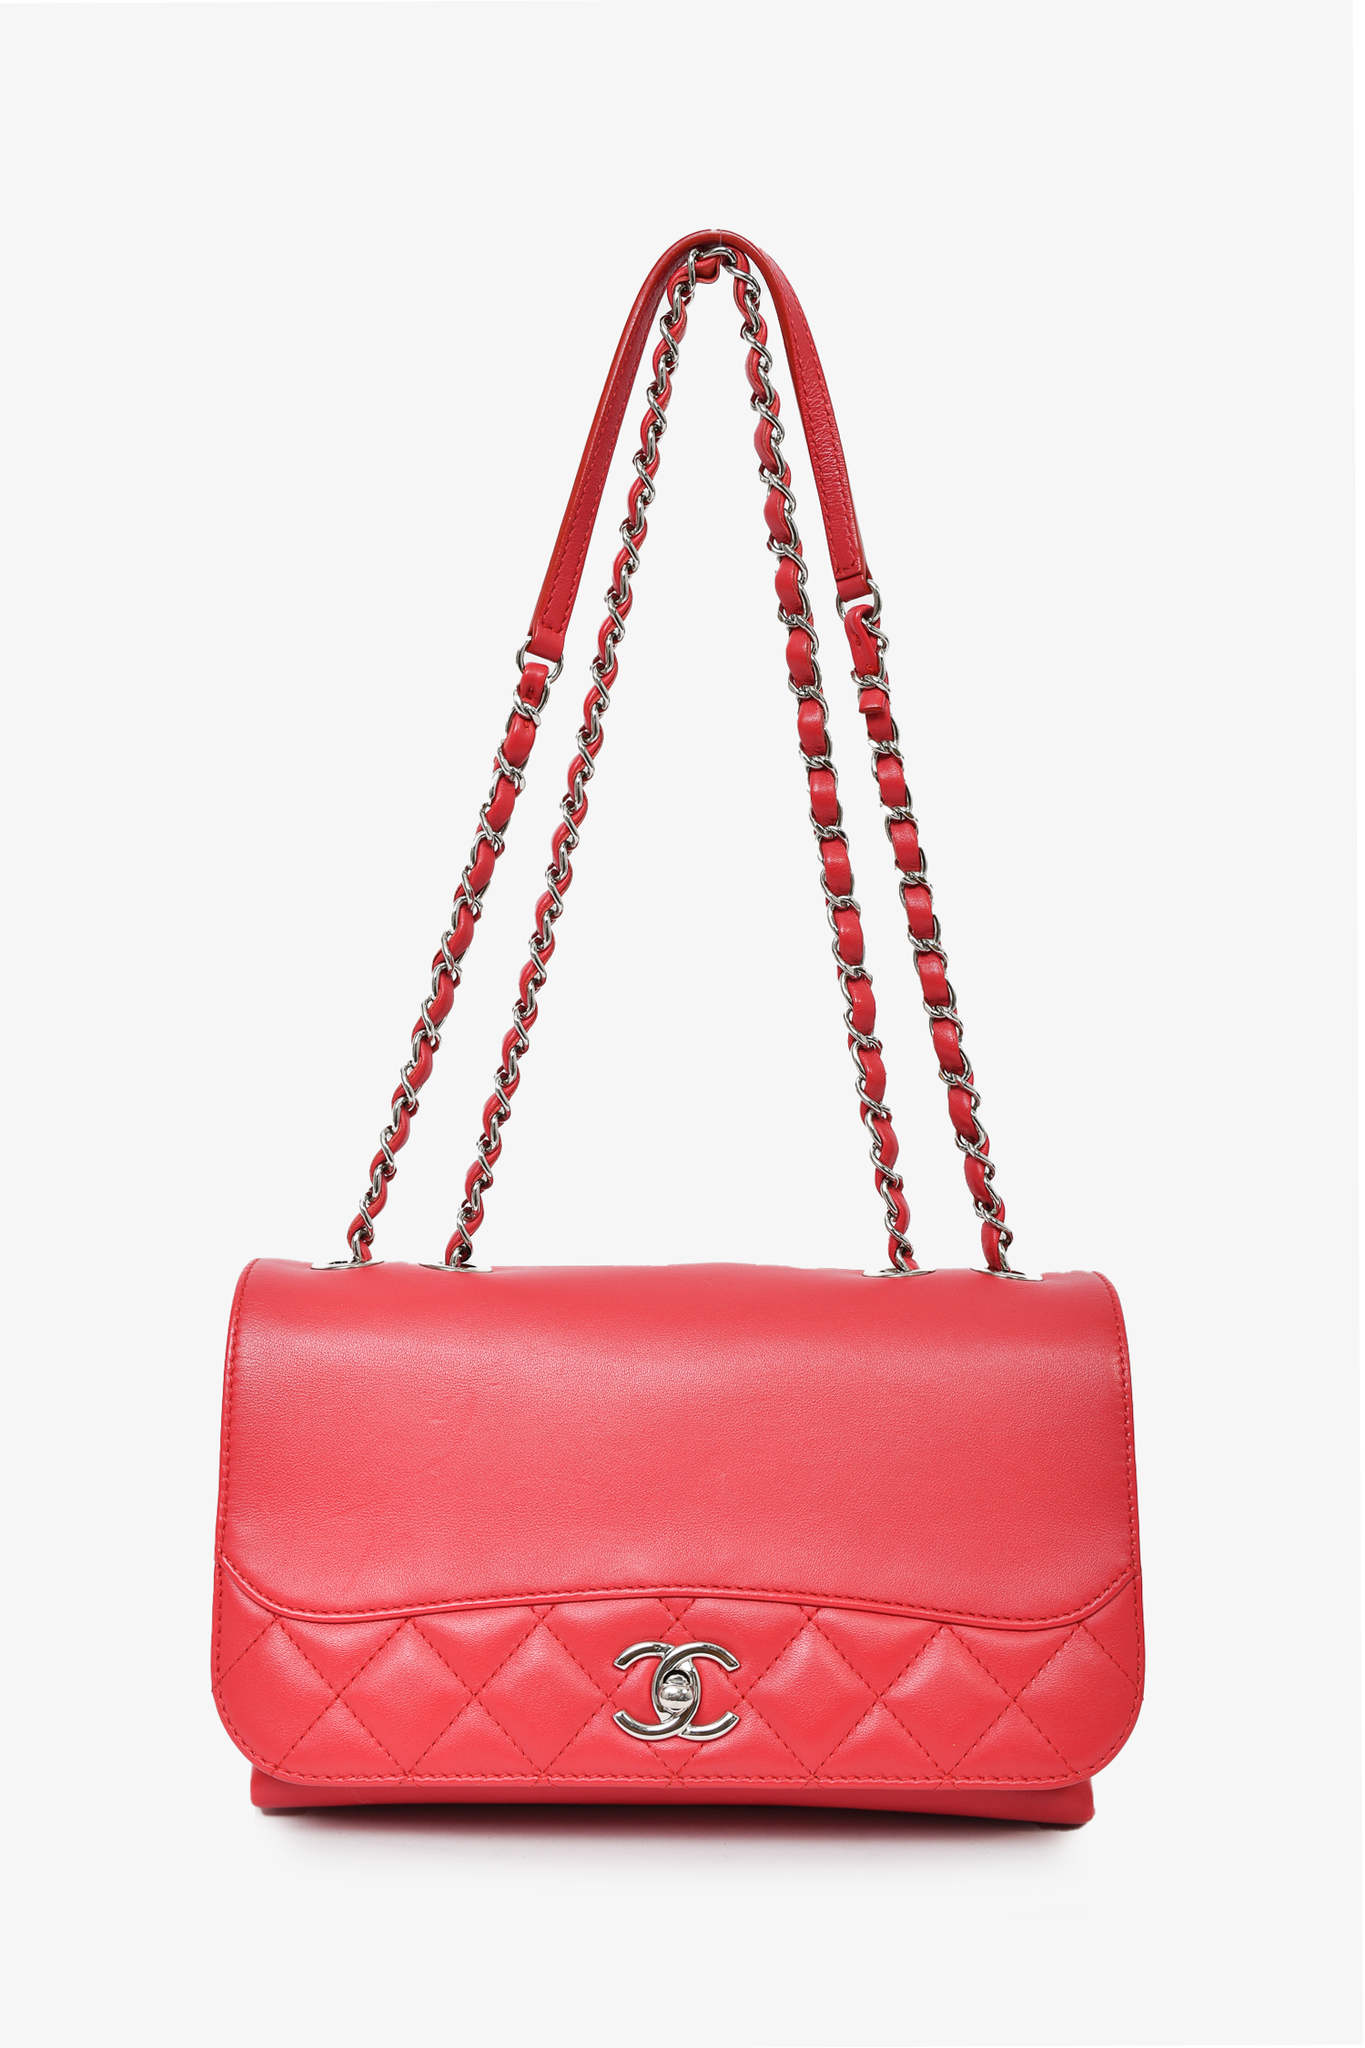 Chanel 2016 Red Leather Small Tramezzo Shoulder Bag – Mine & Yours